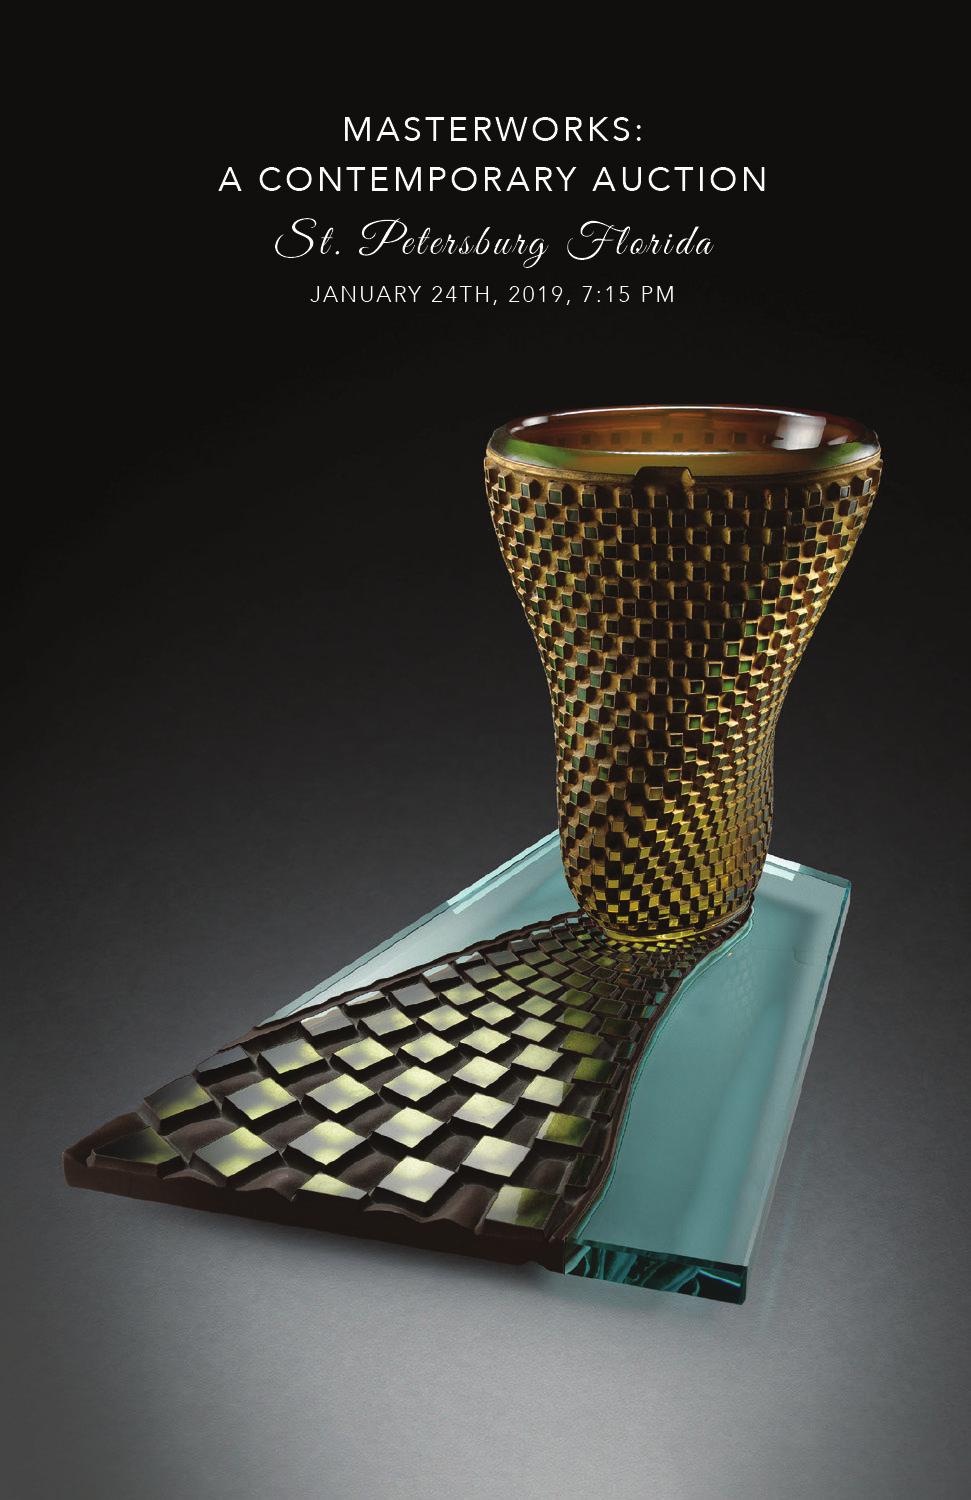 Master Works Auction Catalog Available Now See the auction online today www.habatatglass.